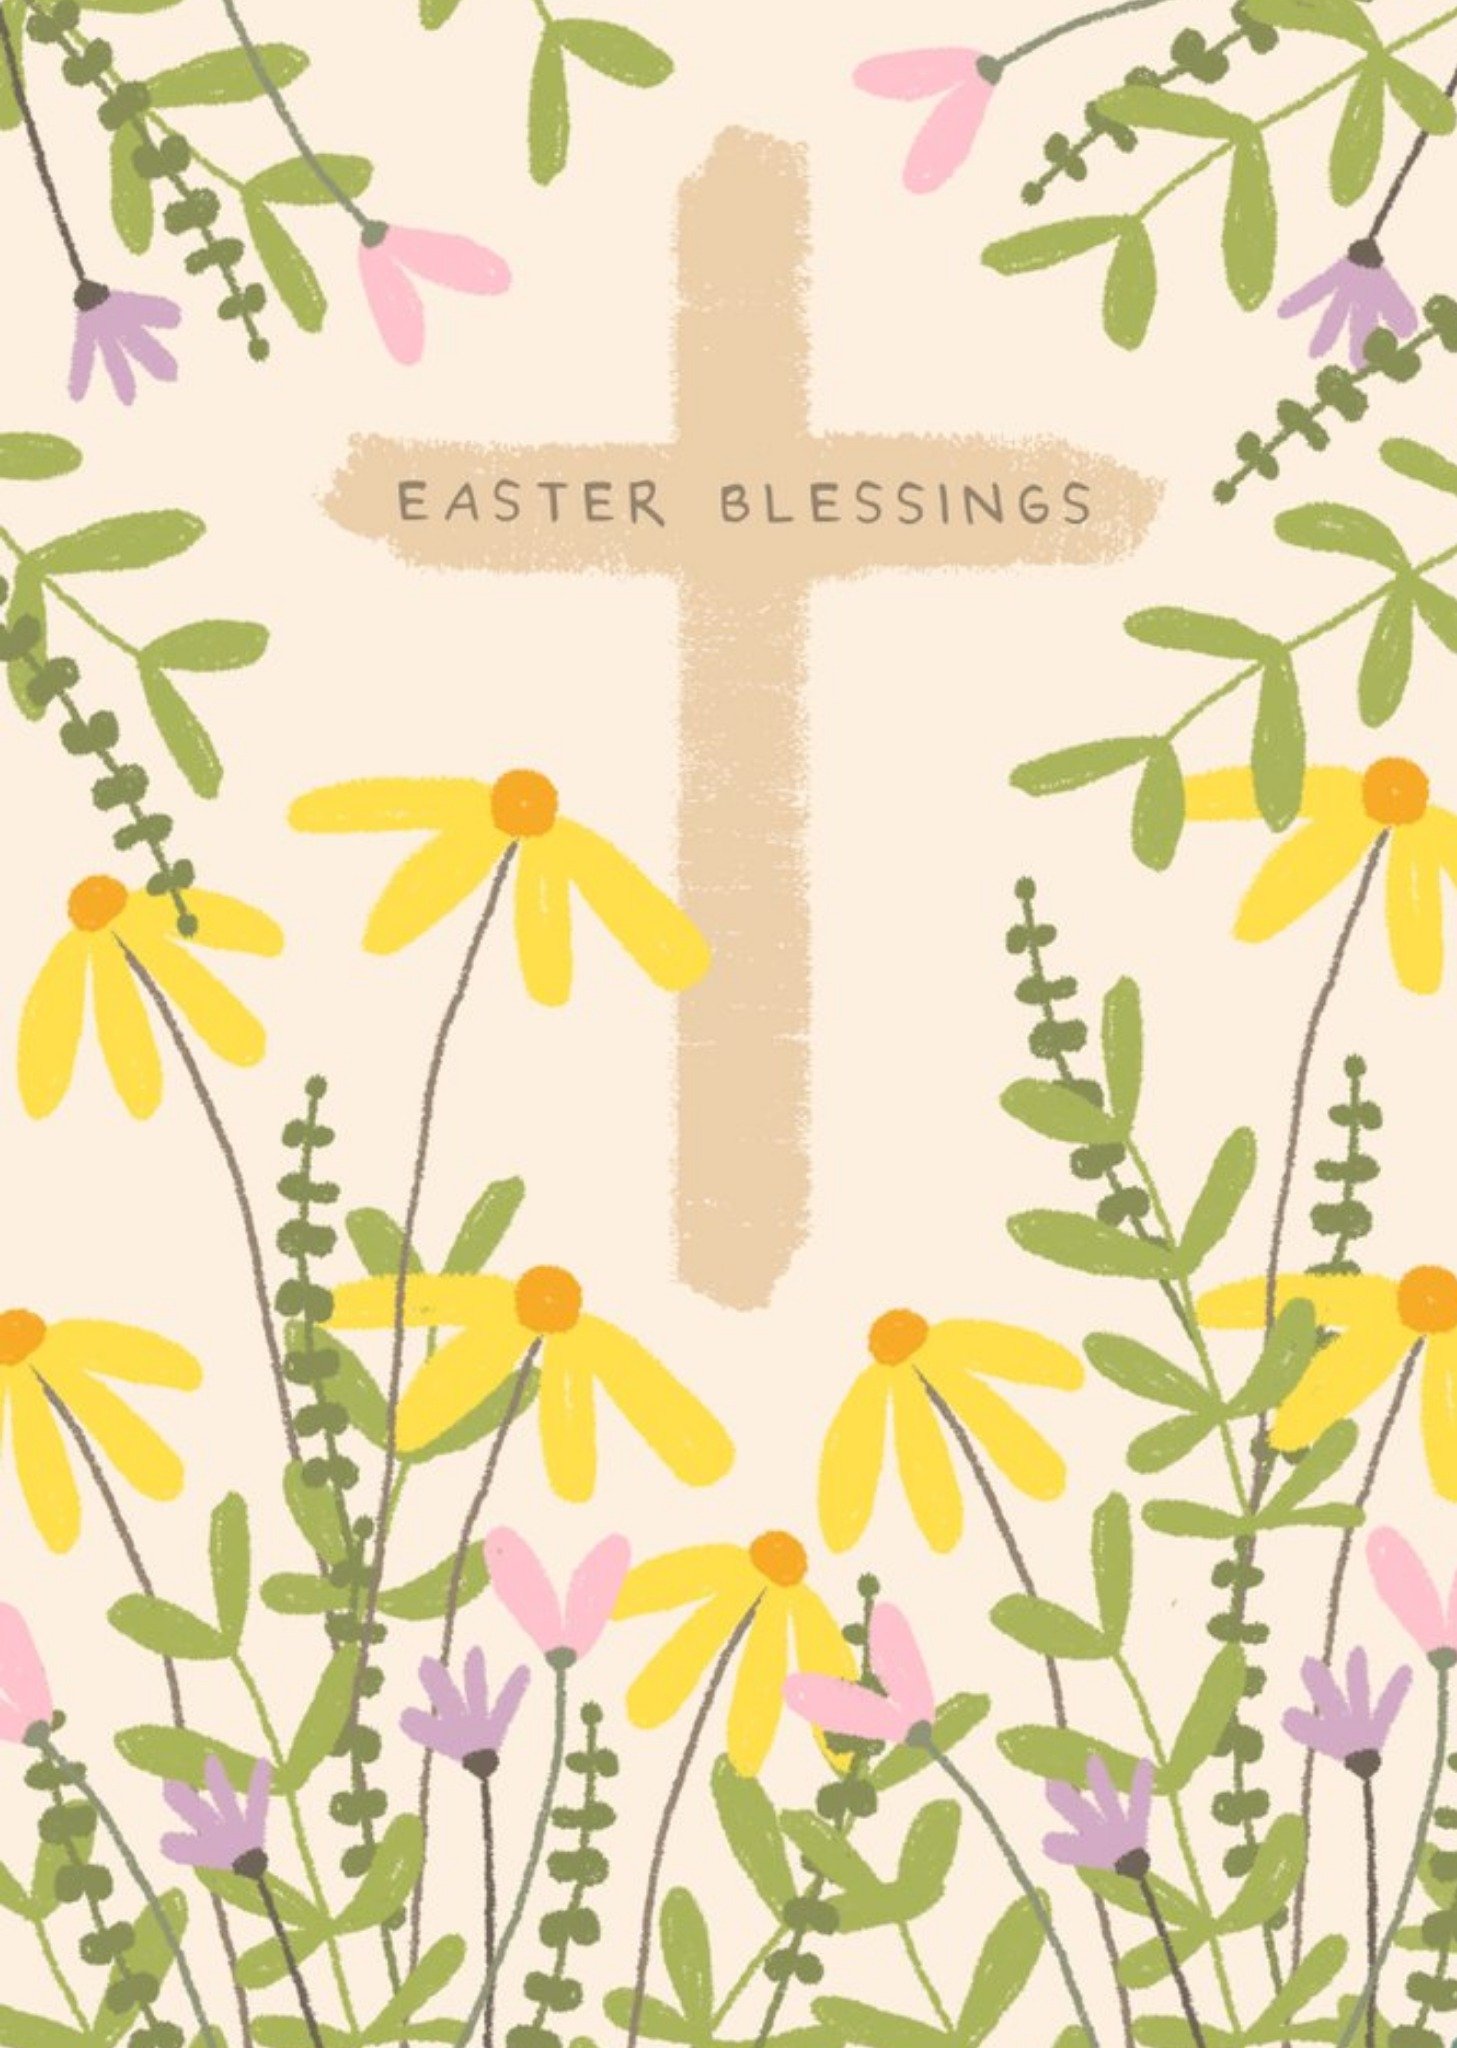 Moonpig Illustration Of The Christian Cross Surrounded By Flowers Easter Blessing Card, Large